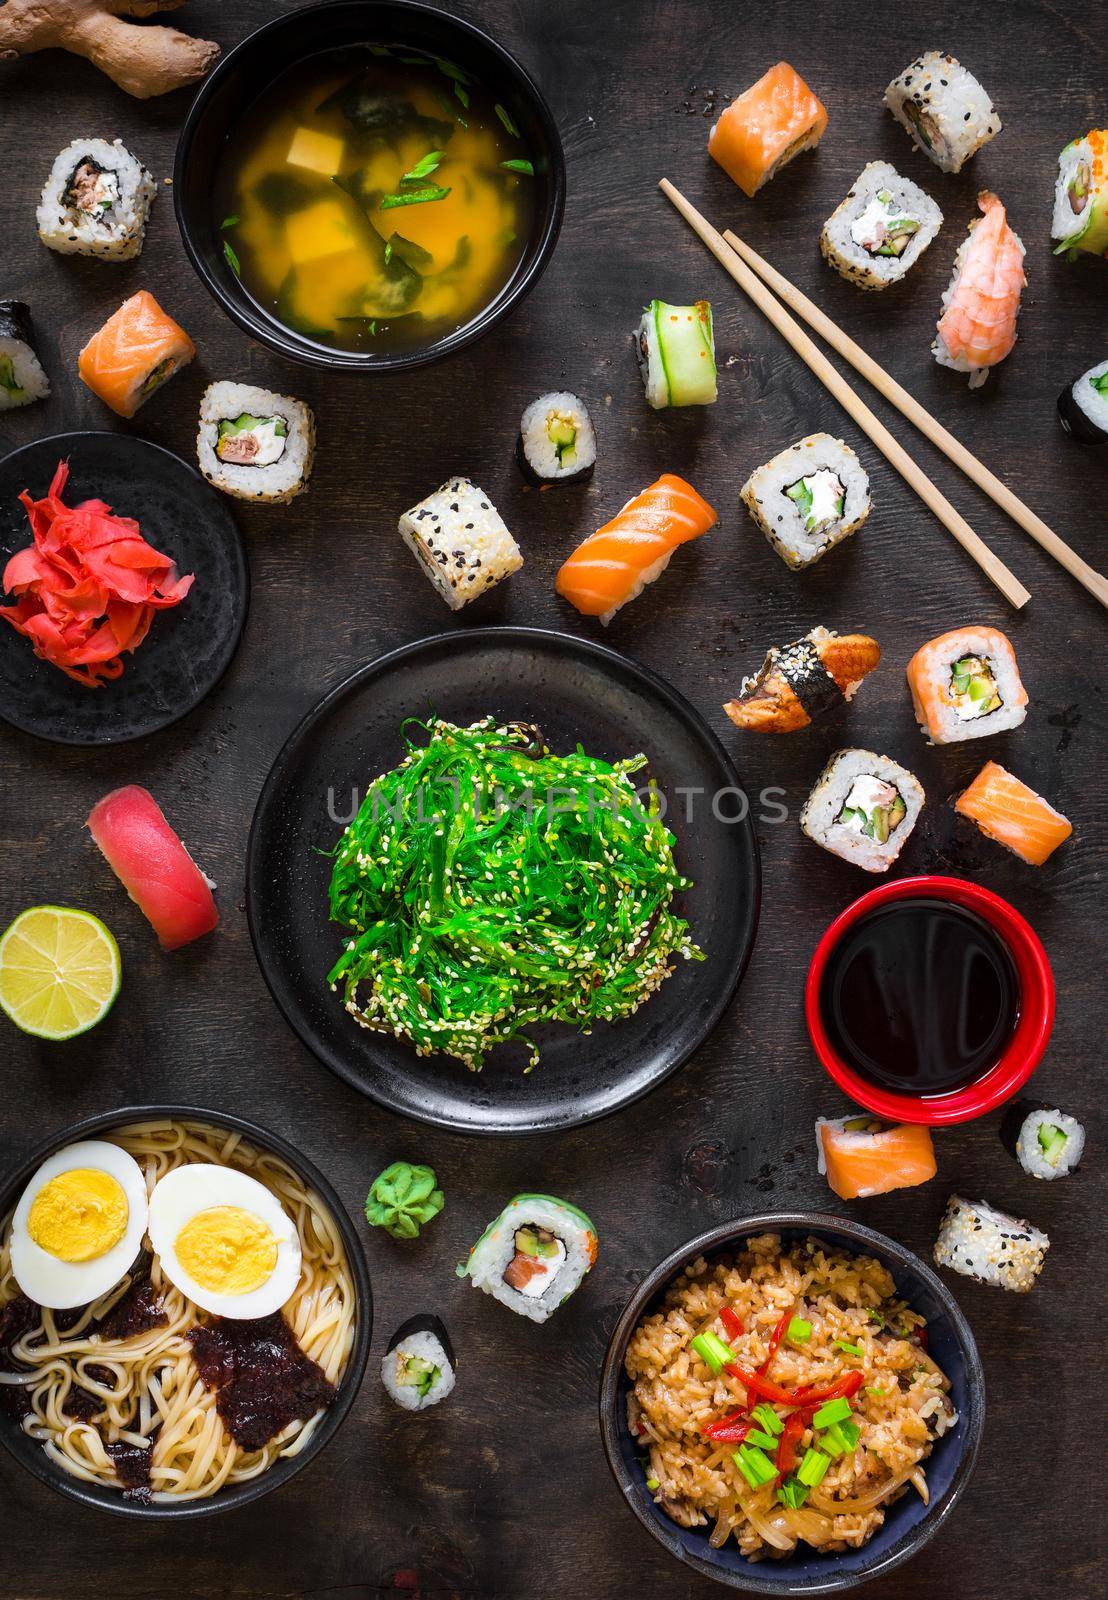 Table served with sushi and traditional japanese food on dark background. Sushi rolls, hiyashi wakame, miso soup, ramen, fried rice with vegetables, nigiri, soy sauce, сhopsticks. Overhead....